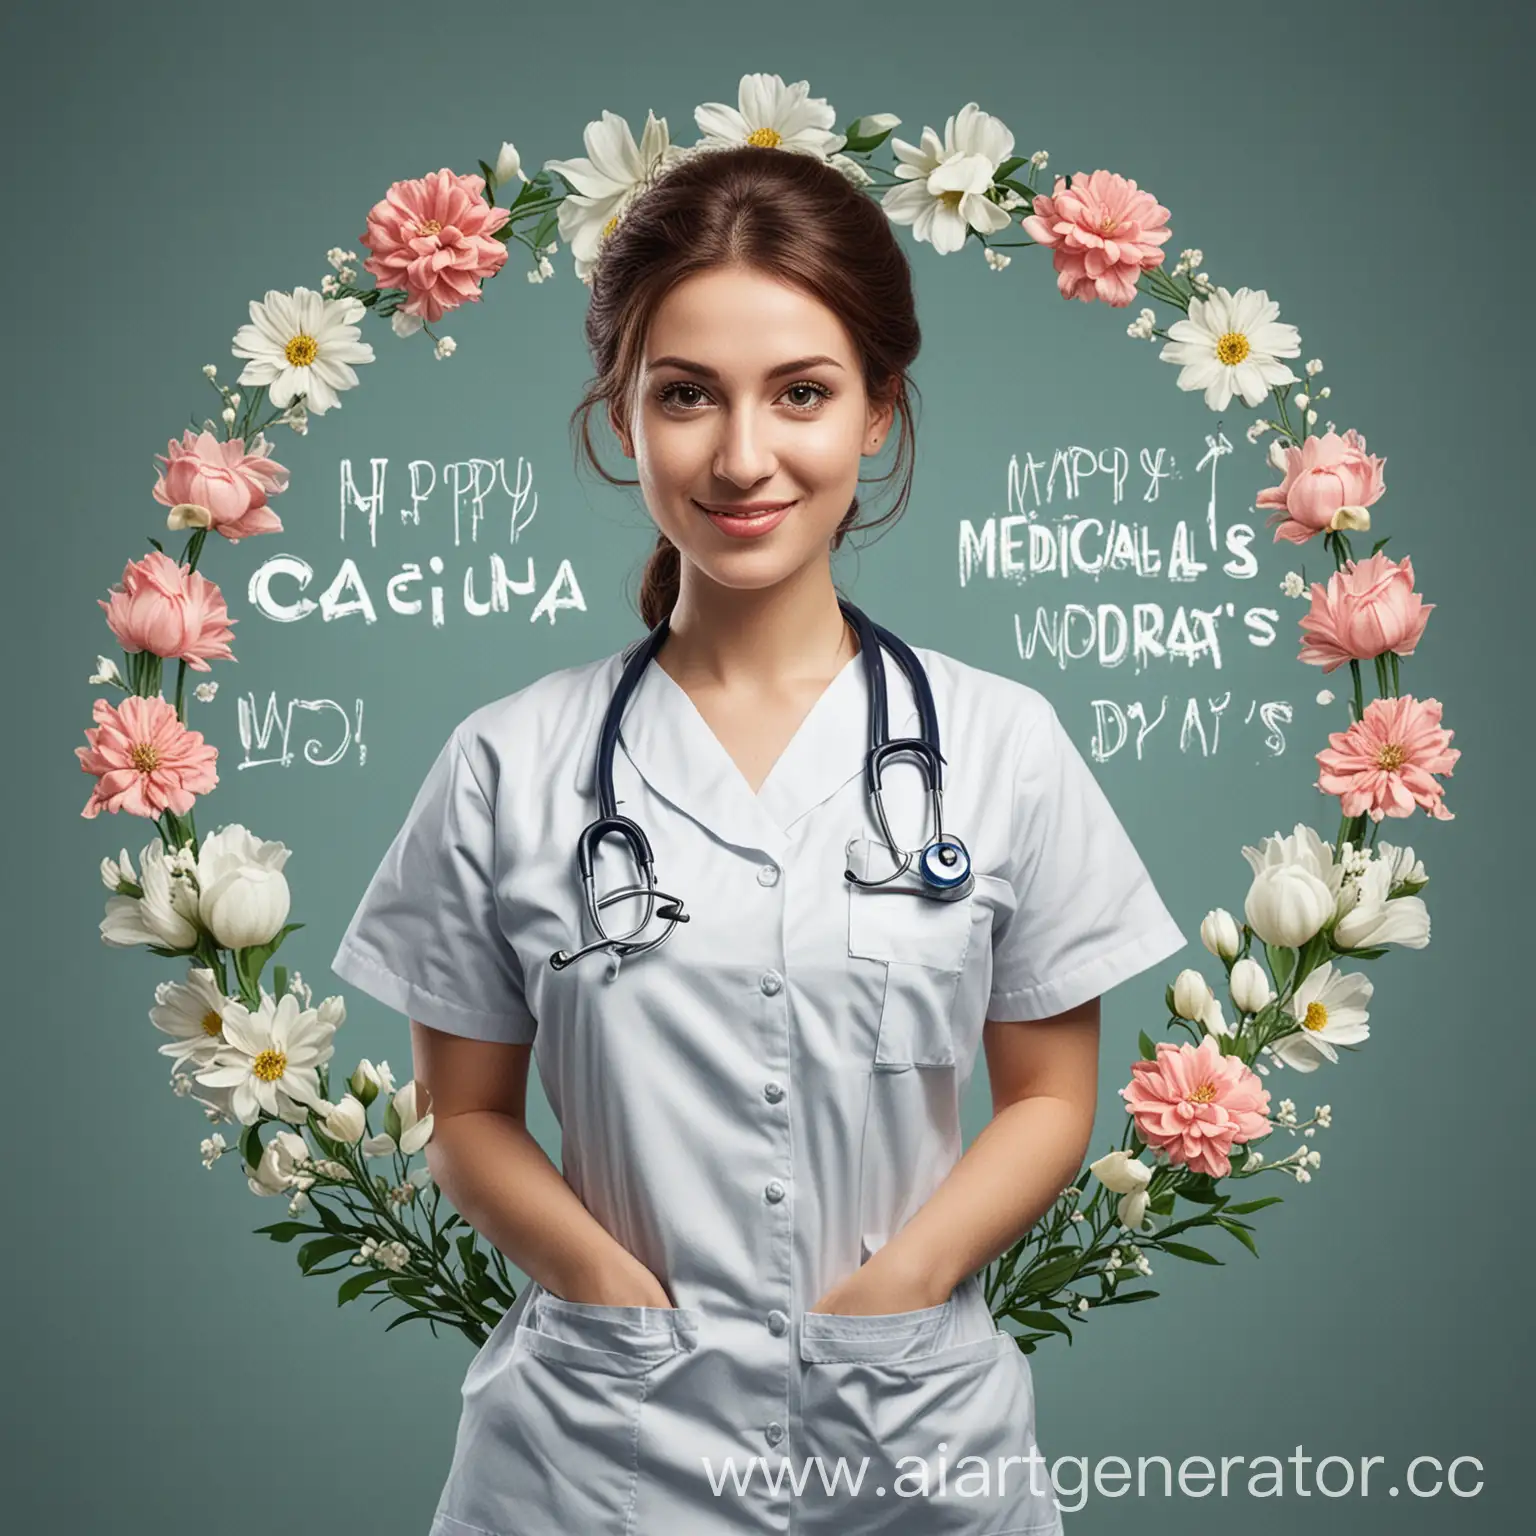 Congratulations-to-Medical-Workers-on-Their-Special-Day